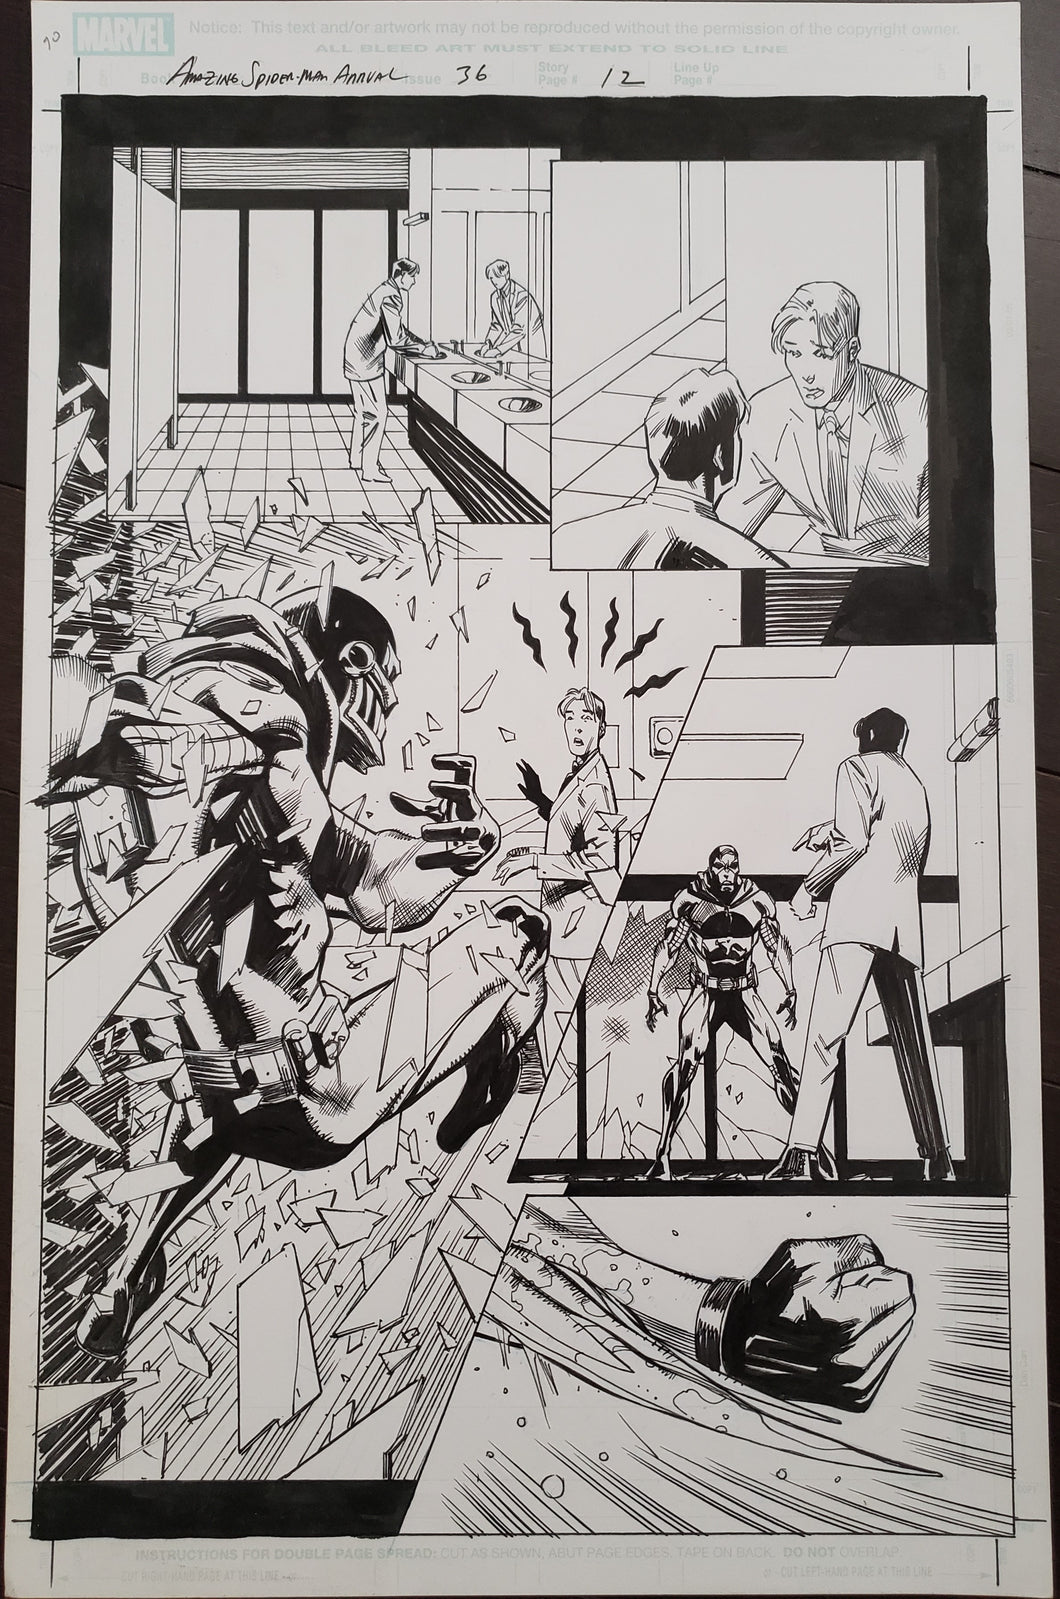 Amazing Spider-Man Annual 36 - Page 12 - Pat Oliffe / Andy Lanning - FIRST APPEARANCE!!